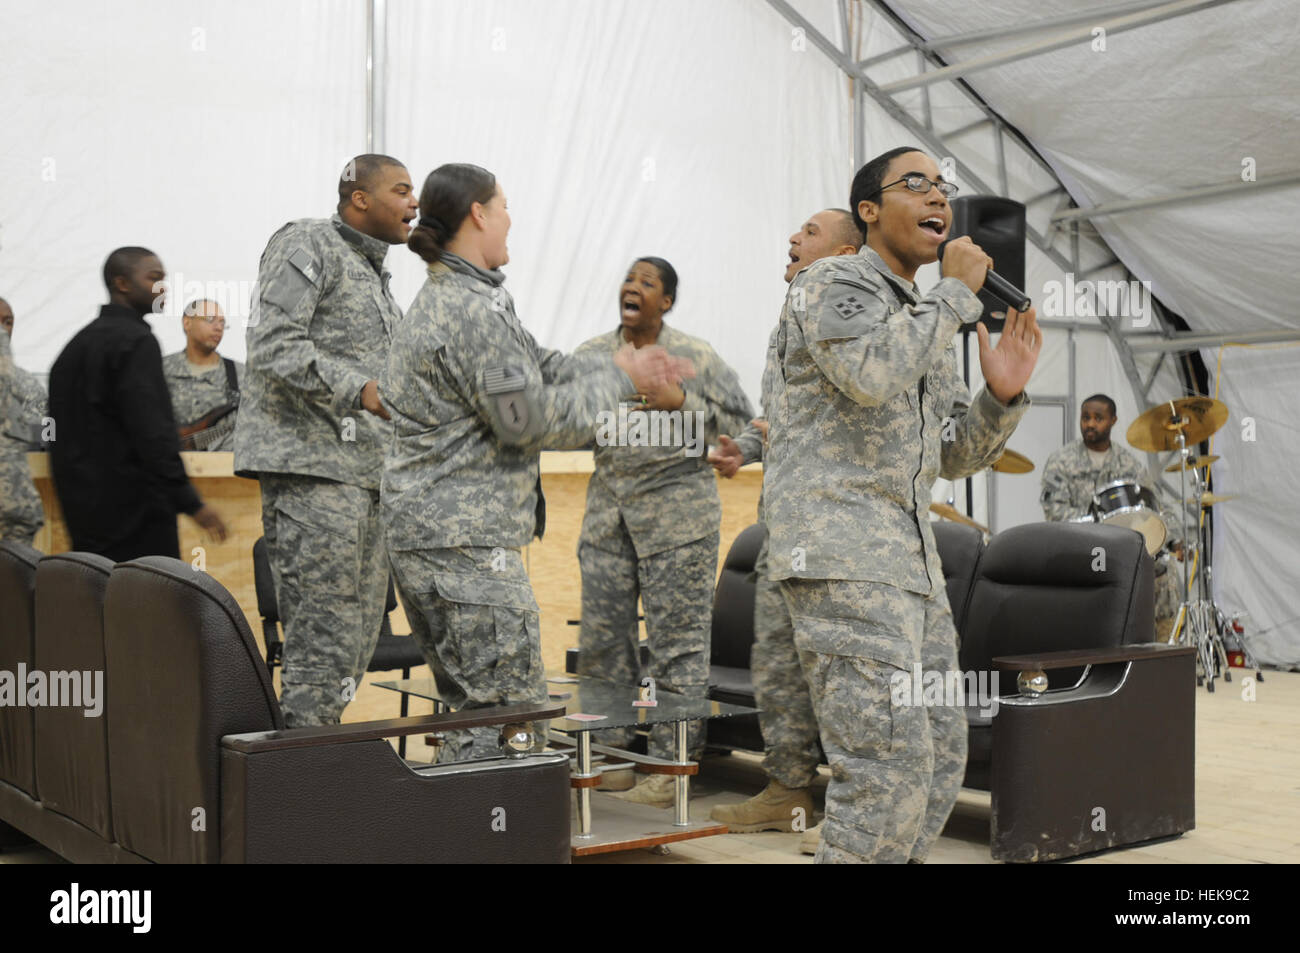 Staff Sgt. Terrence Young, an equal opportunity leader for 404th Aviation Support Battalion, 4th Combat Aviation Brigade, 4th Infantry Division, recites Dr. Martin Luther King Jr.’s “I Have A Dream” speech during a Black History Month event held, Feb. 25, at Camp Marmal. The ceremony was a celebration intended to inspire and educate service members about the history and achievements of black Americans. (U.S. Army photograph by Sgt. Sean Harriman) 4th Combat Aviation Brigade celebrates Black History Month 110225-A--005 Stock Photo